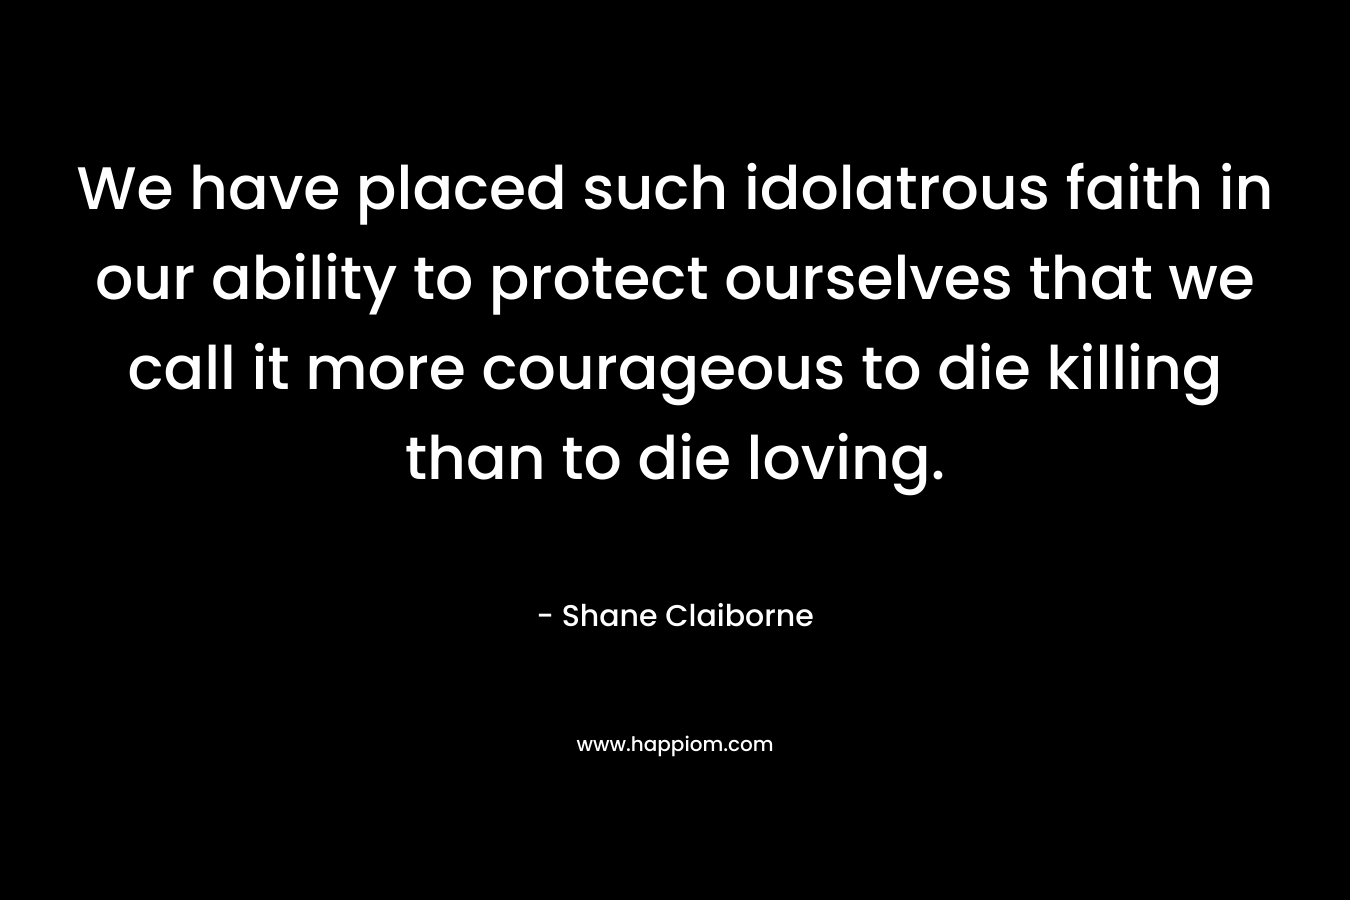 We have placed such idolatrous faith in our ability to protect ourselves that we call it more courageous to die killing than to die loving. – Shane Claiborne